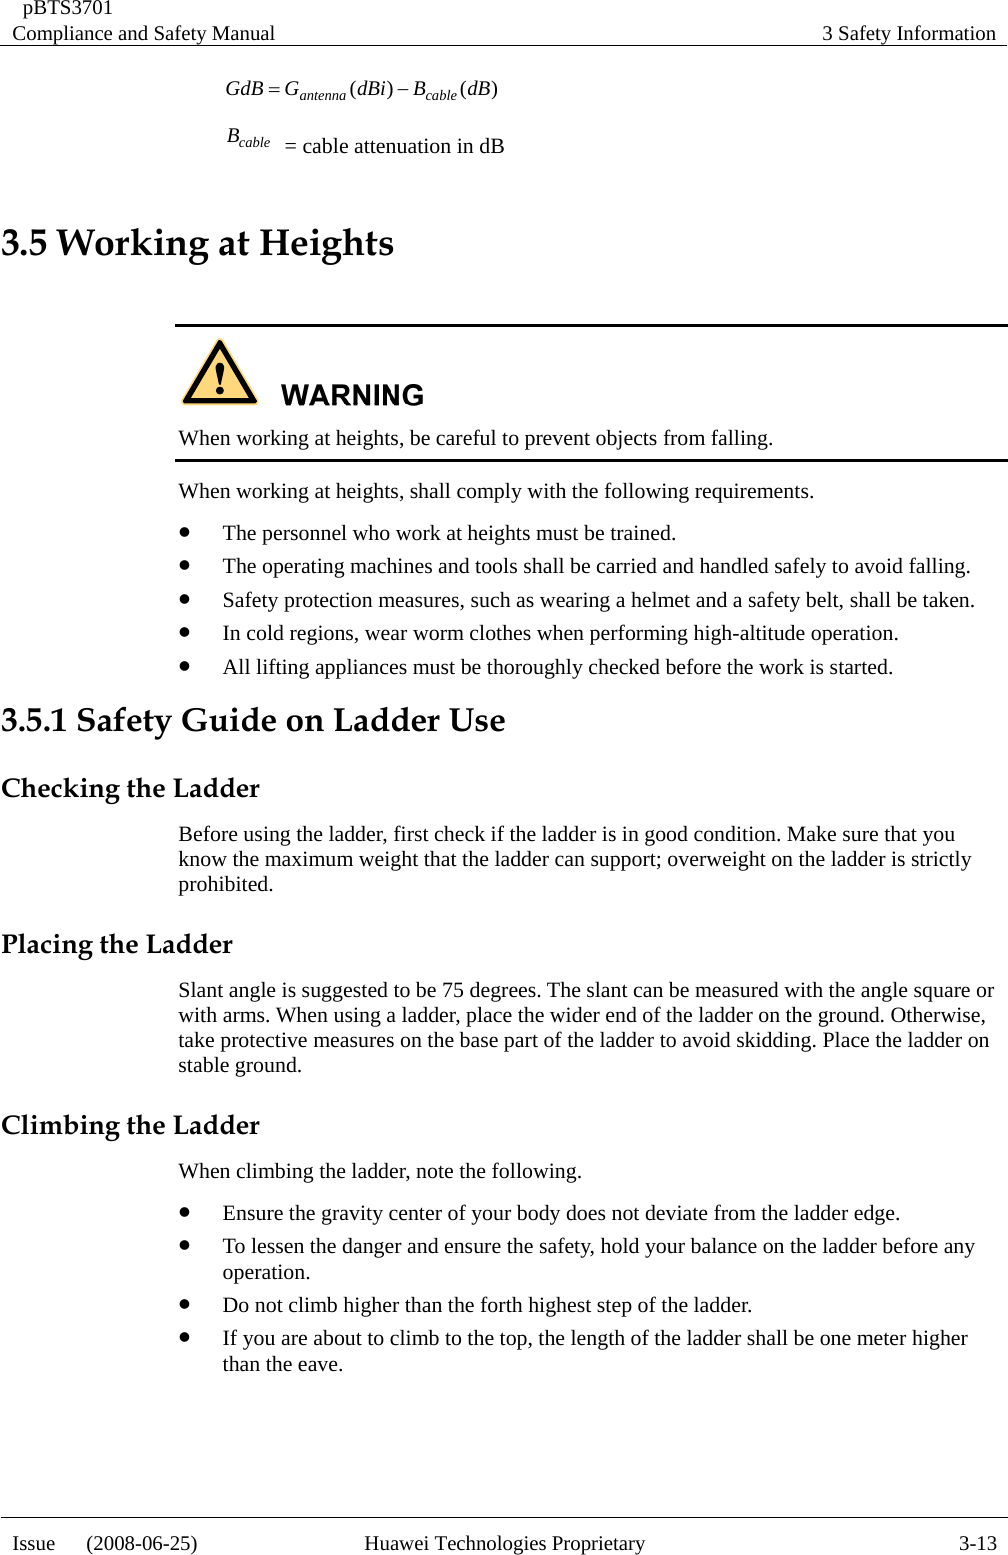  pBTS3701 Compliance and Safety Manual  3 Safety Information Issue   (2008-06-25)  Huawei Technologies Proprietary  3-13)()( dBBdBiGGdB cableantenna−= cableB  = cable attenuation in dB 3.5 Working at Heights   When working at heights, be careful to prevent objects from falling. When working at heights, shall comply with the following requirements. z The personnel who work at heights must be trained. z The operating machines and tools shall be carried and handled safely to avoid falling. z Safety protection measures, such as wearing a helmet and a safety belt, shall be taken. z In cold regions, wear worm clothes when performing high-altitude operation. z All lifting appliances must be thoroughly checked before the work is started. 3.5.1 Safety Guide on Ladder Use Checking the Ladder Before using the ladder, first check if the ladder is in good condition. Make sure that you know the maximum weight that the ladder can support; overweight on the ladder is strictly prohibited. Placing the Ladder Slant angle is suggested to be 75 degrees. The slant can be measured with the angle square or with arms. When using a ladder, place the wider end of the ladder on the ground. Otherwise, take protective measures on the base part of the ladder to avoid skidding. Place the ladder on stable ground. Climbing the Ladder When climbing the ladder, note the following. z Ensure the gravity center of your body does not deviate from the ladder edge. z To lessen the danger and ensure the safety, hold your balance on the ladder before any operation. z Do not climb higher than the forth highest step of the ladder. z If you are about to climb to the top, the length of the ladder shall be one meter higher than the eave.  